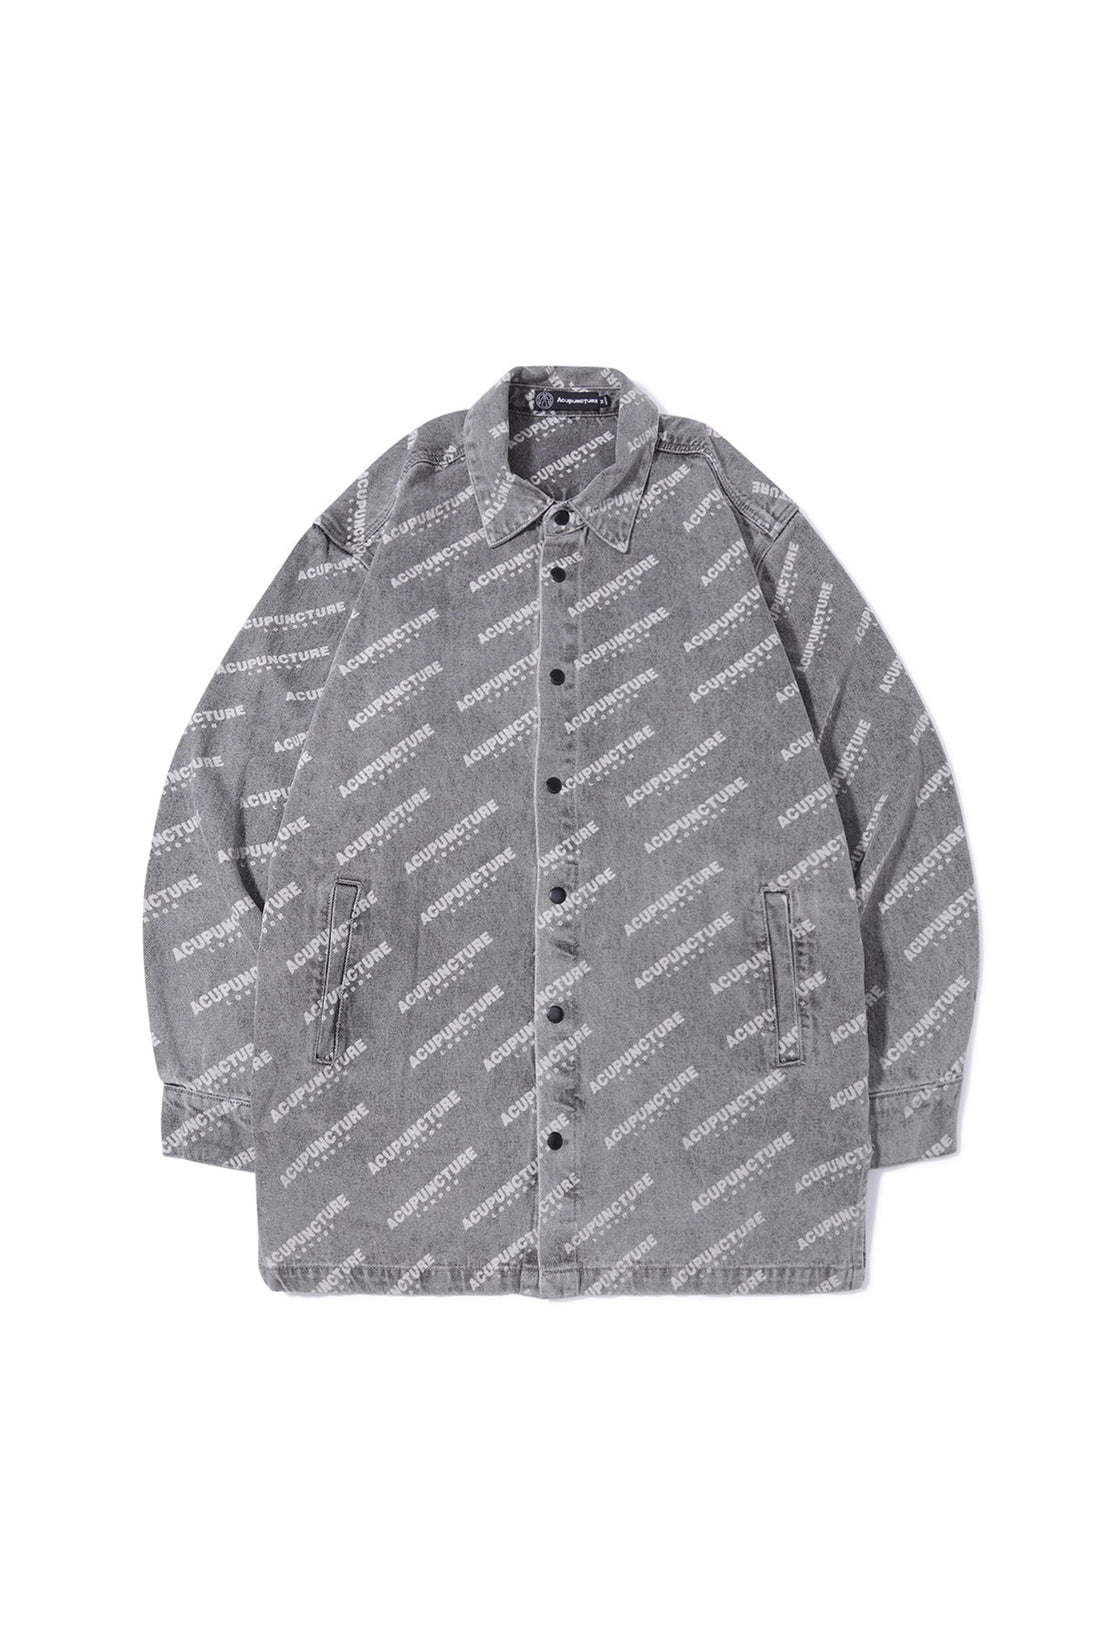 ALL-OVER SHACKET GREY Acupuncture